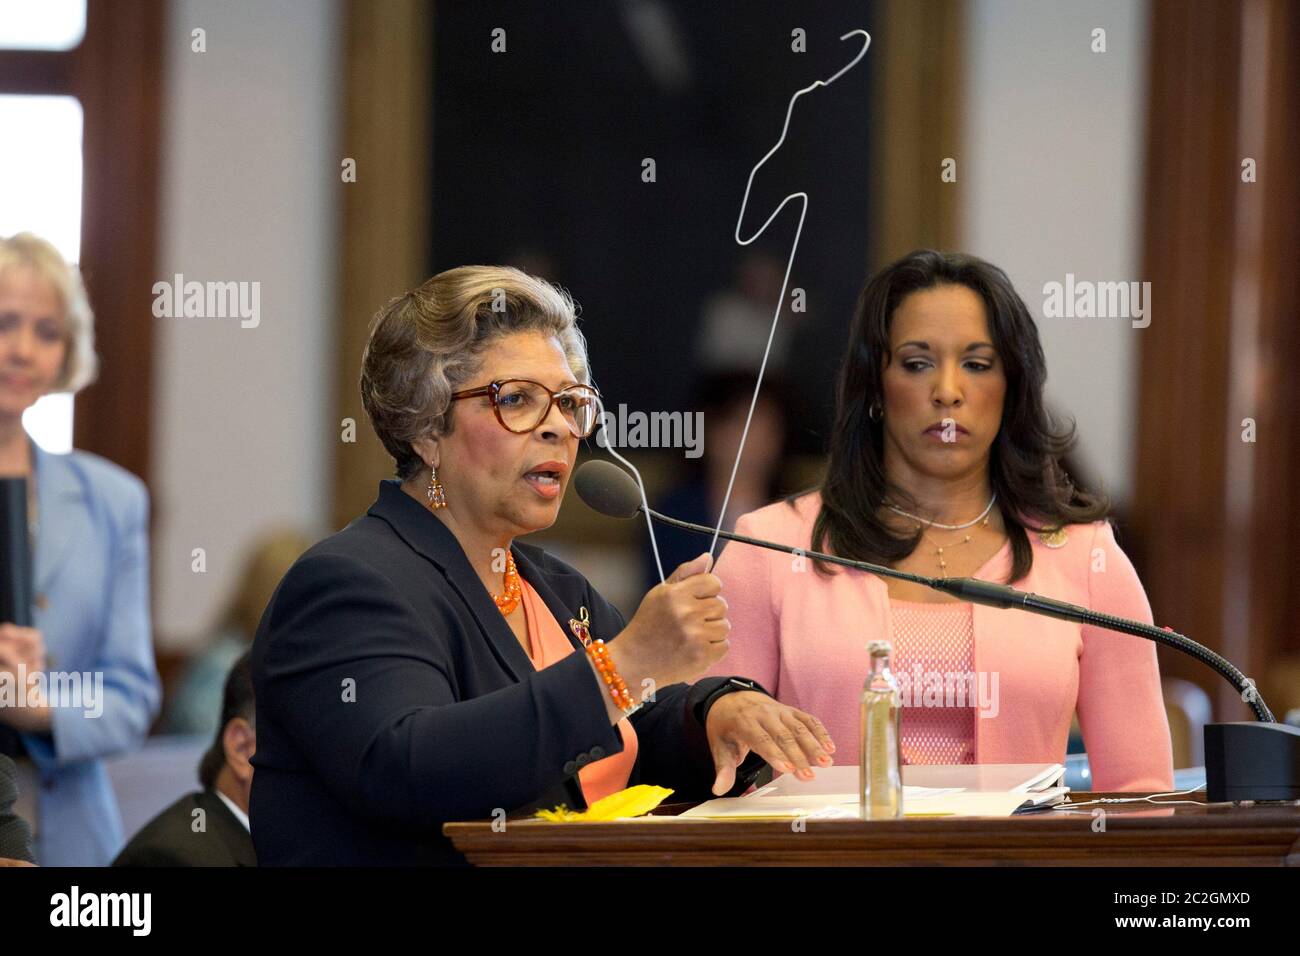 Austin Texas USA, July 10 2013: State Rep. Senfronia Thompson, D-Houston, holds primitive abortion tools--reconfigured coat hangers--as Texas lawmakers struggle to pass a bill that would limit the number of abortion providers by increasing medical standards for clinics to the level of ambulatory surgical centers. ©Bob Daemmrich Stock Photo